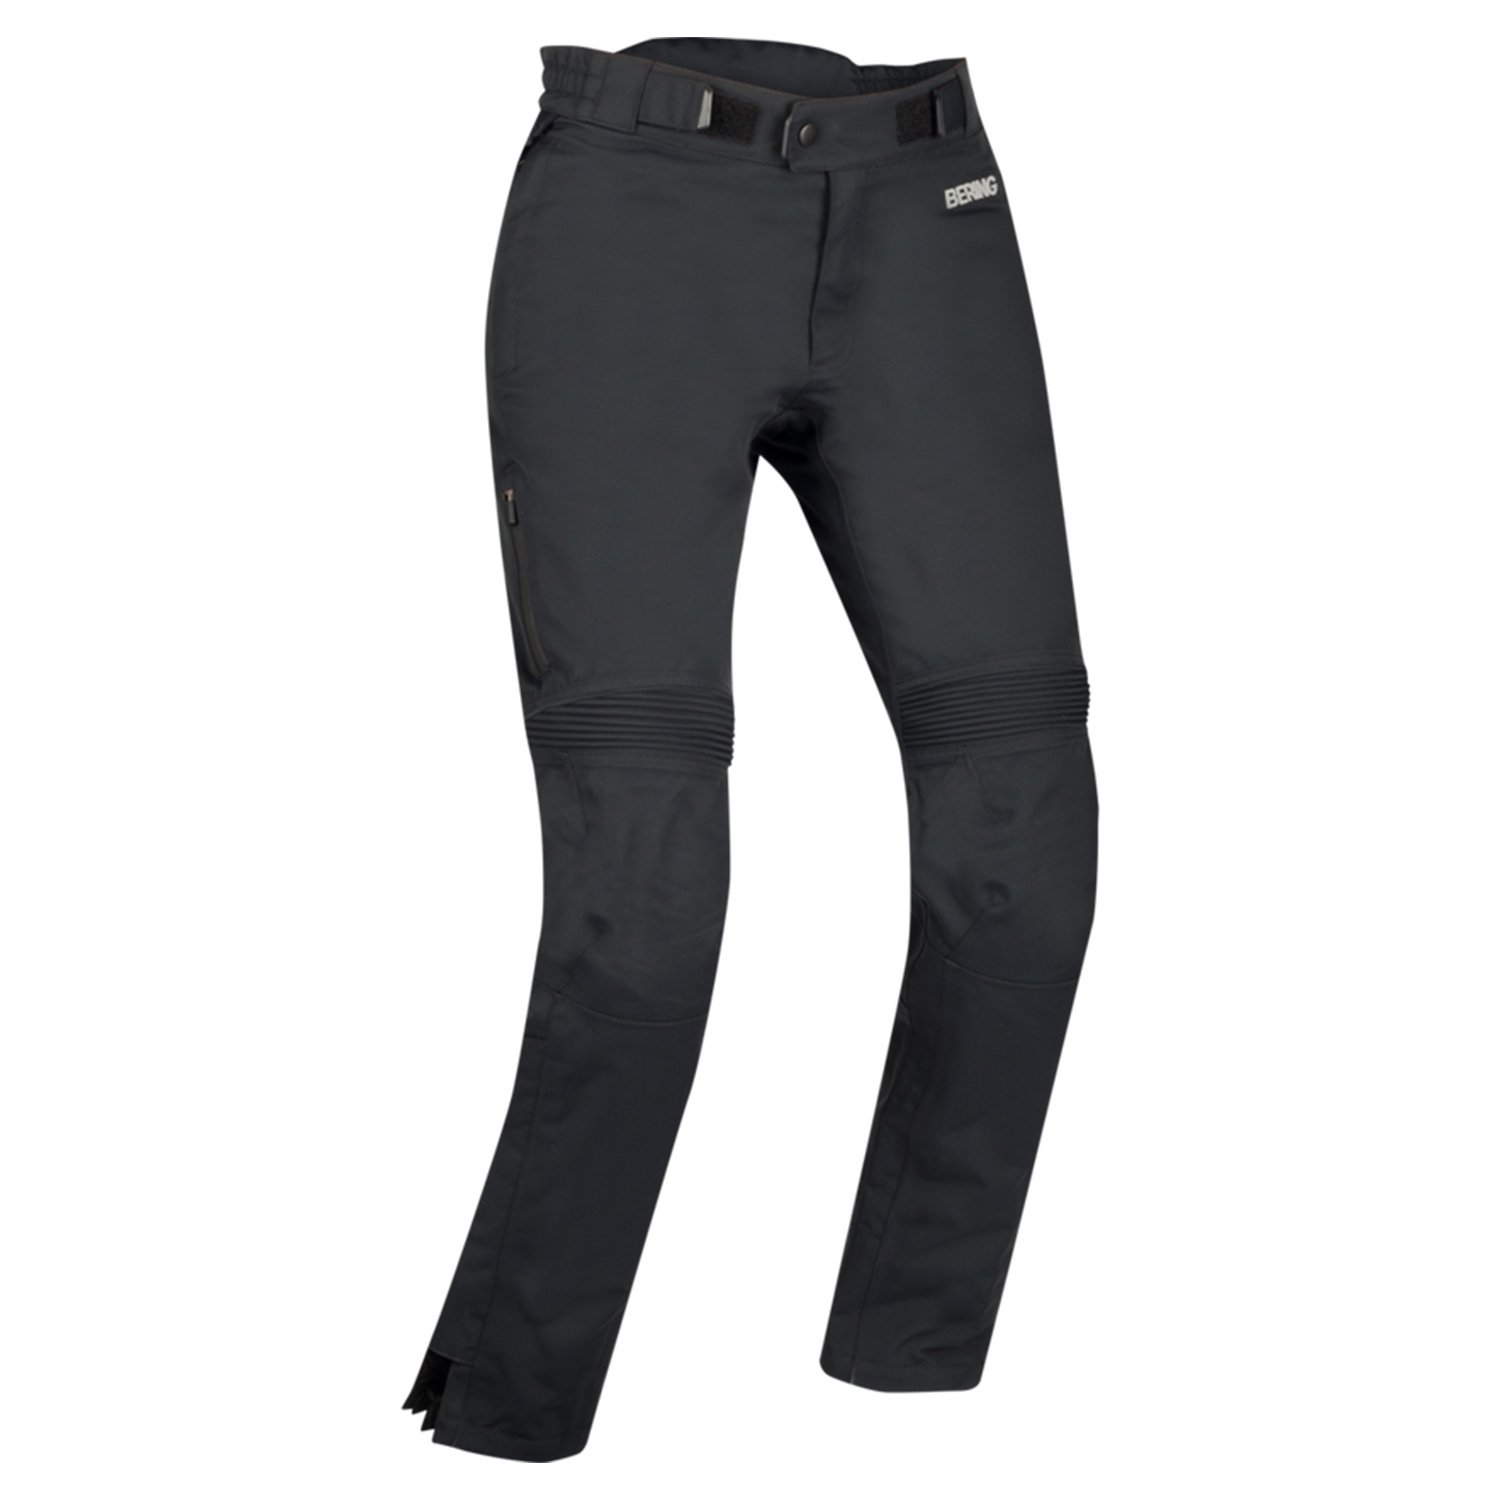 Image of Bering Lady Zephyr Trousers Black Size T4 ID 3660815180891